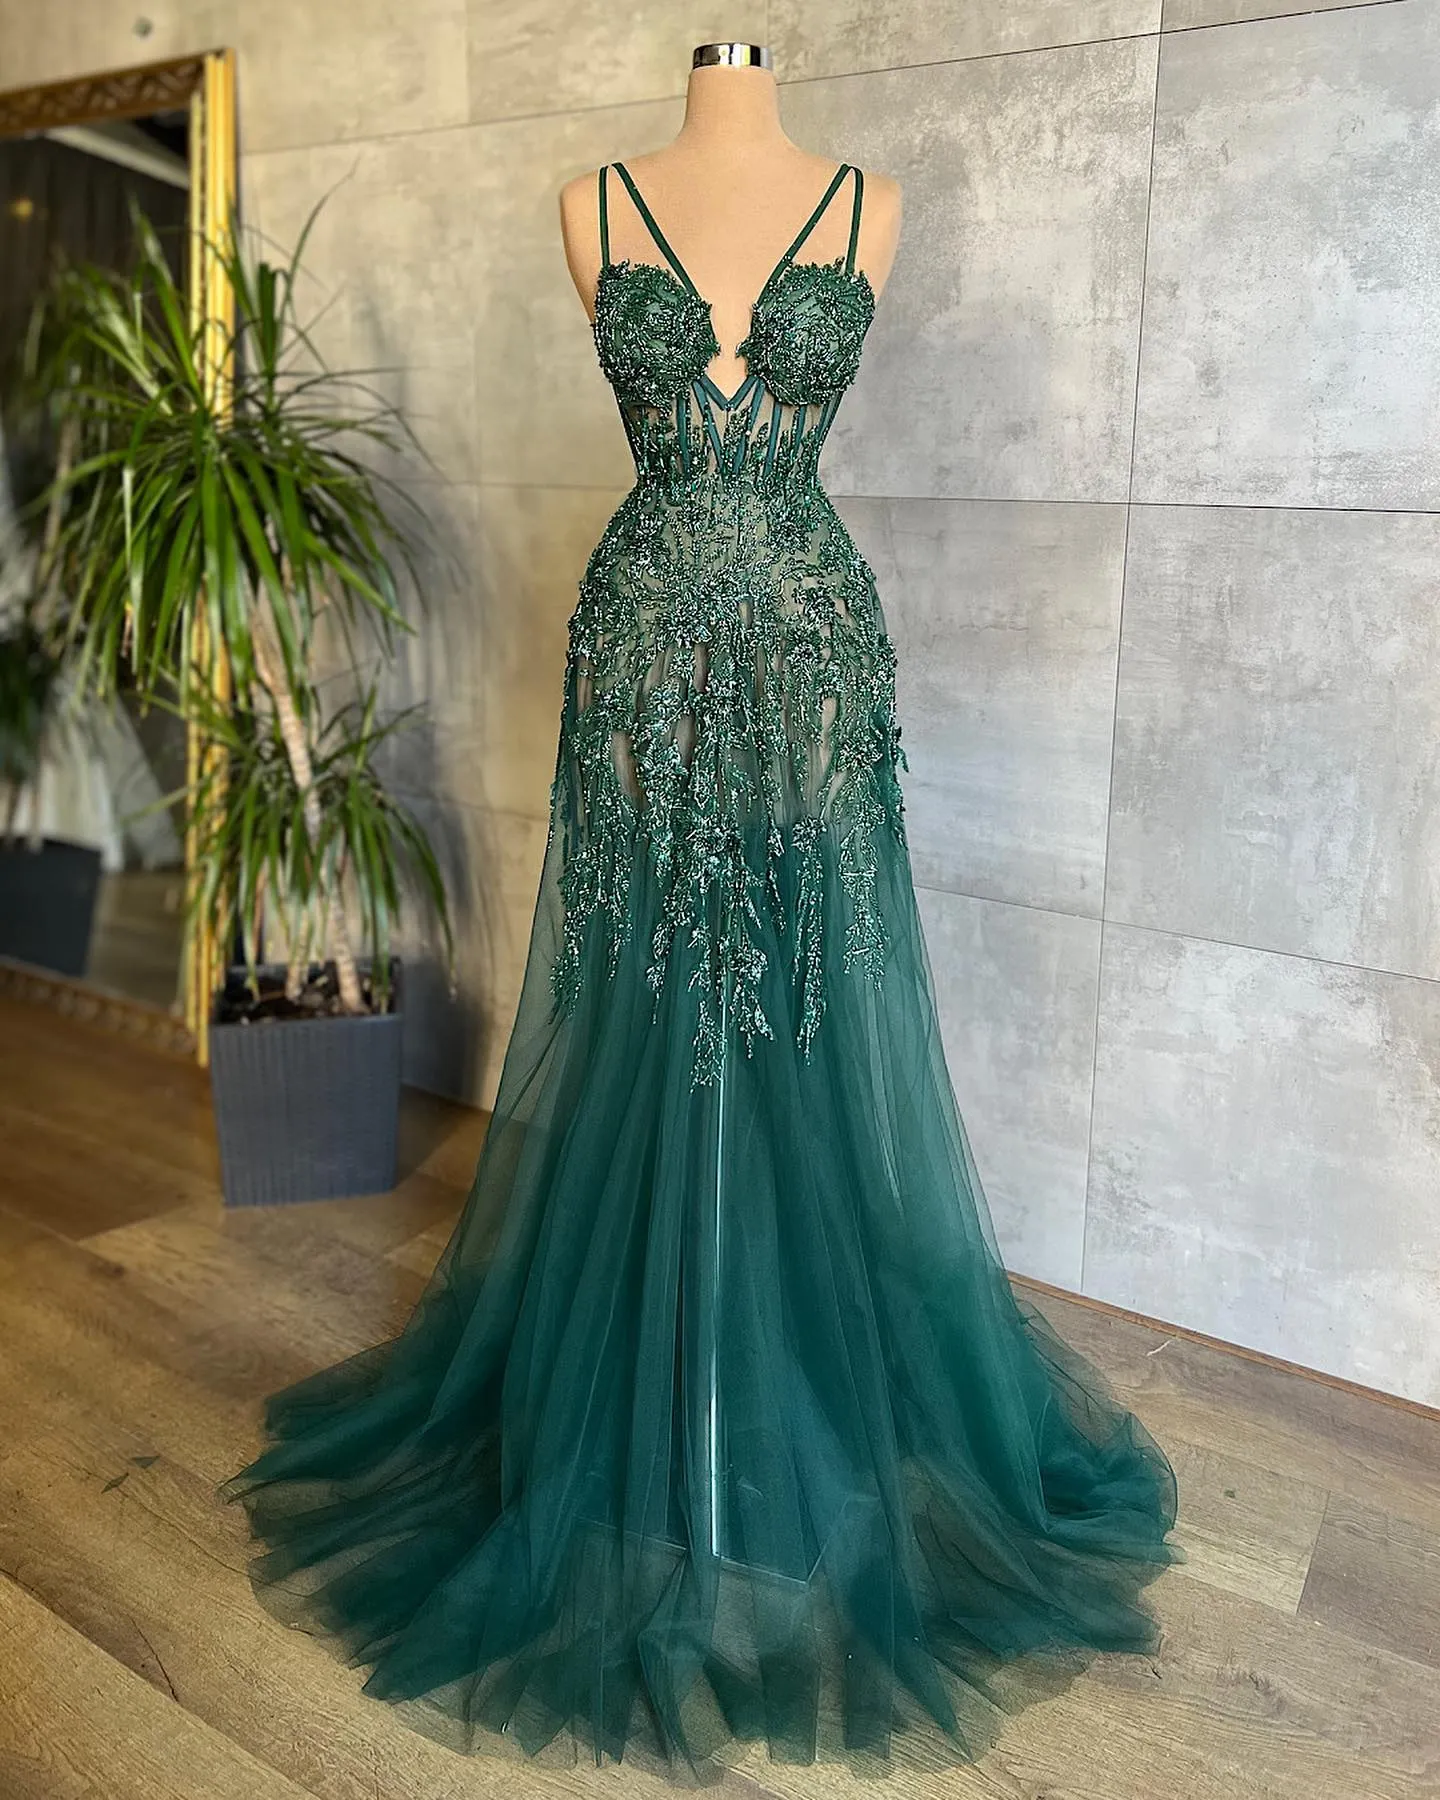 Luxury Green Prom Evening Dresses Arabic Dubai Sexy Spaghetti Straps Backless Beadings Sequins Appliques Party Occasion Gowns Vestidos BC15505